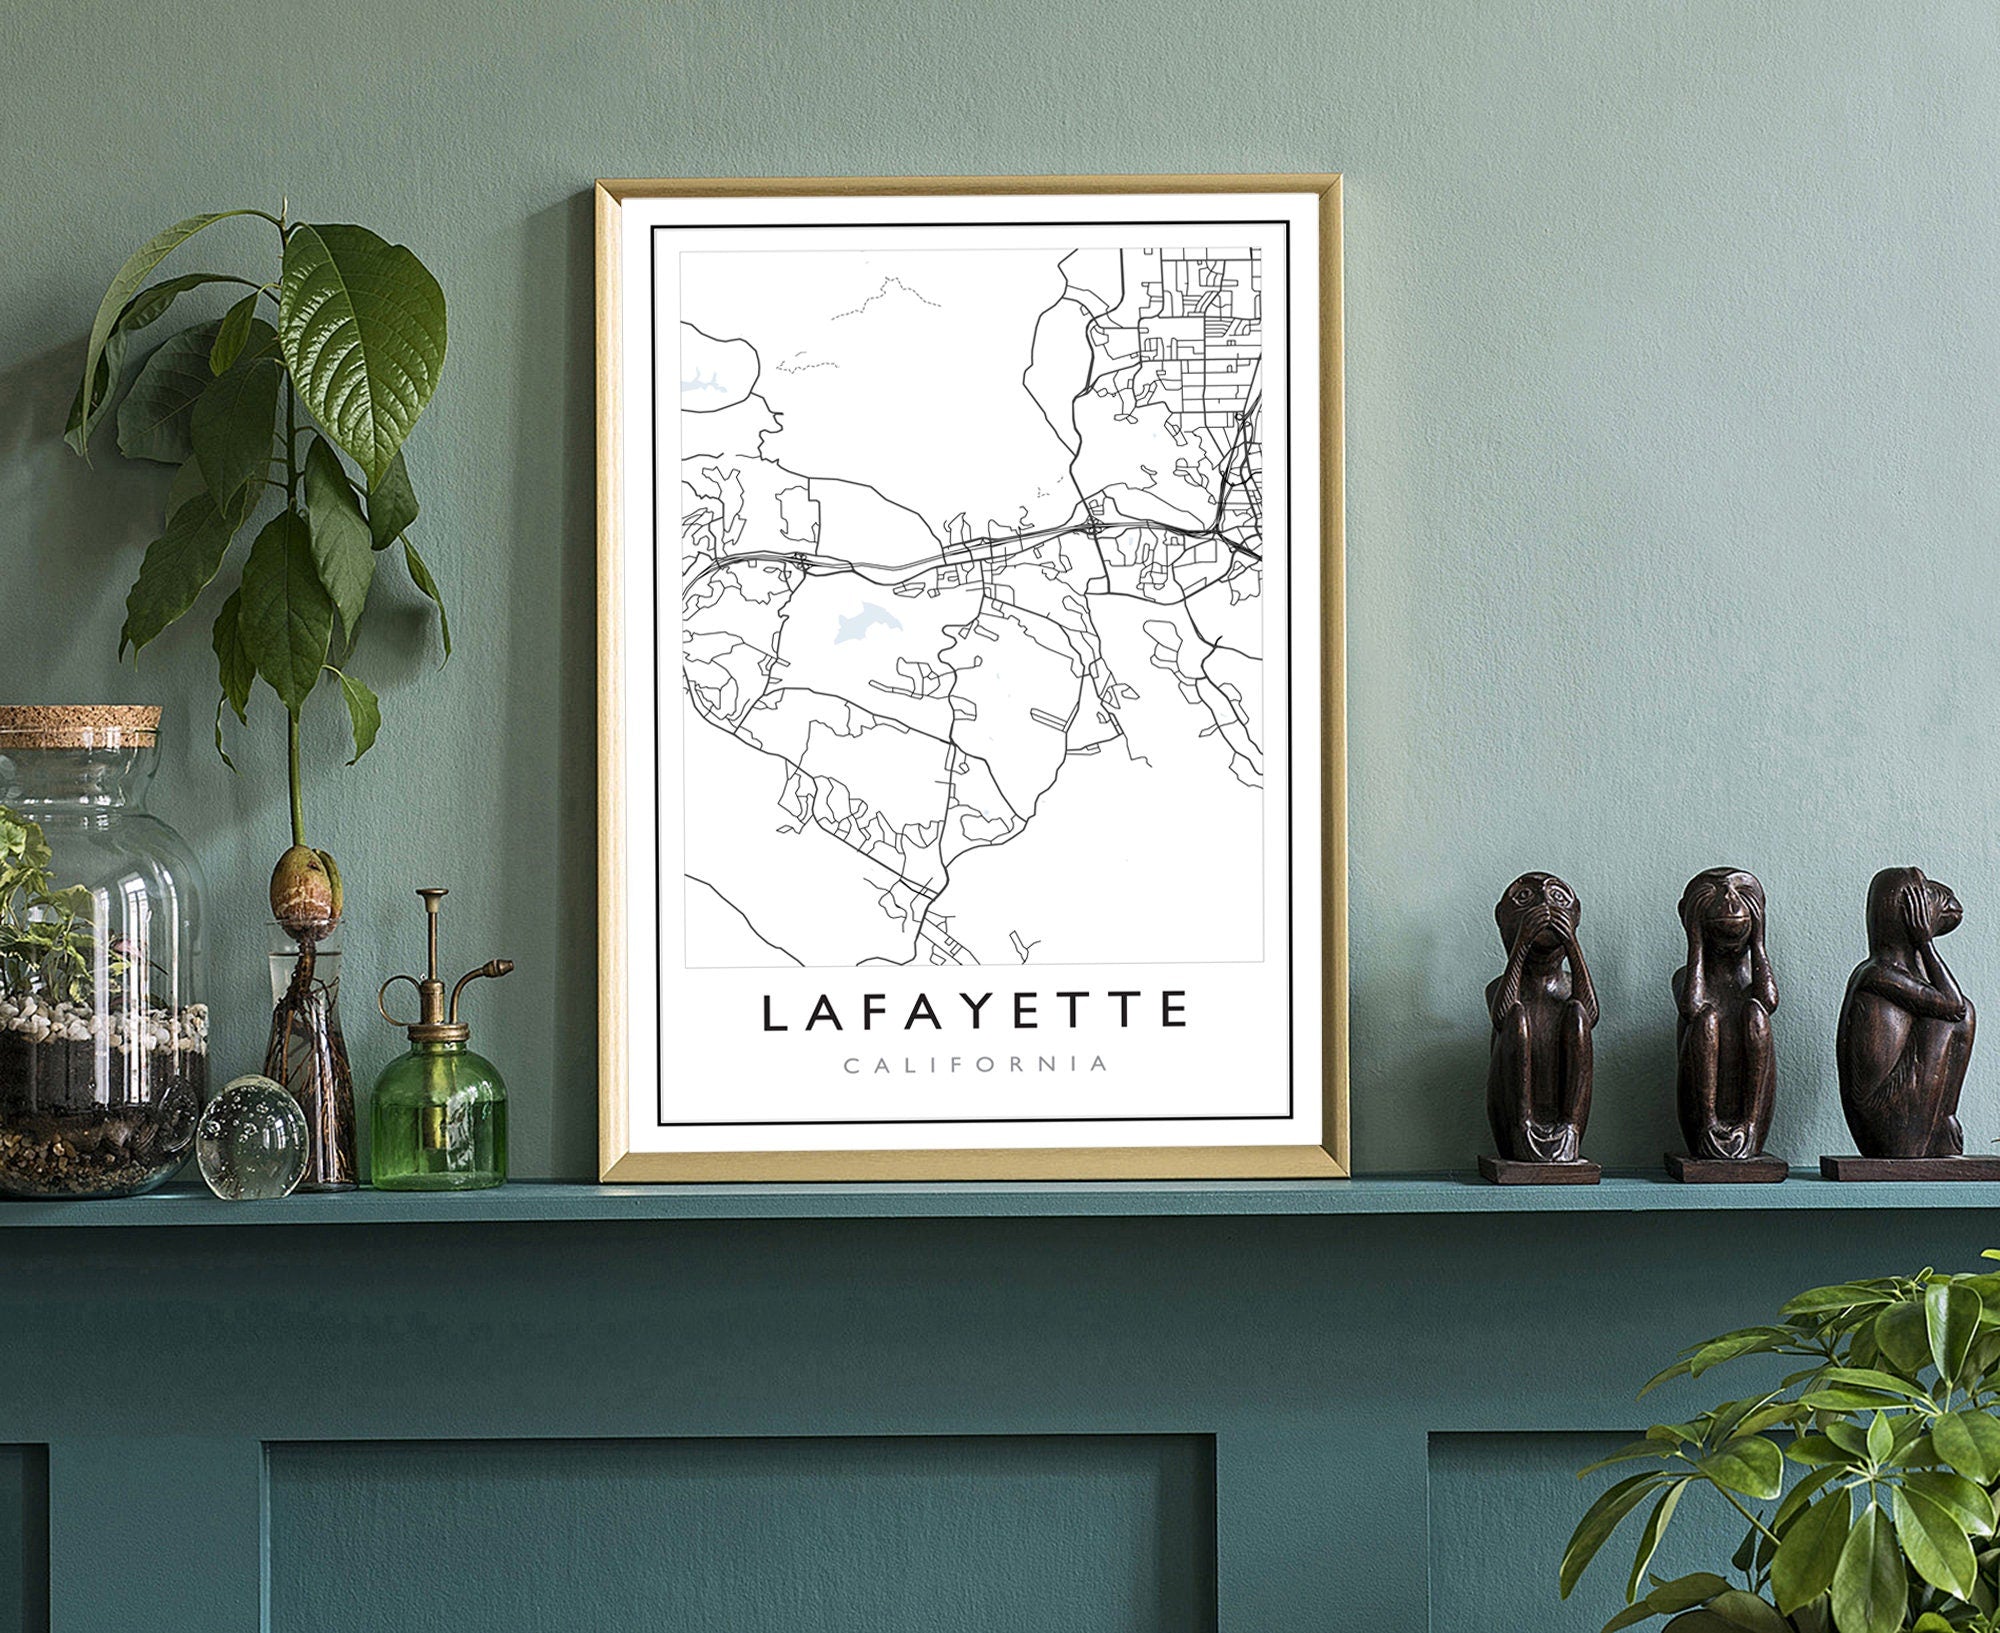 Lafayette California City Map, California Road Map Poster, City Street Map Print, US City Modern City Map, Home Office Wall Decoration